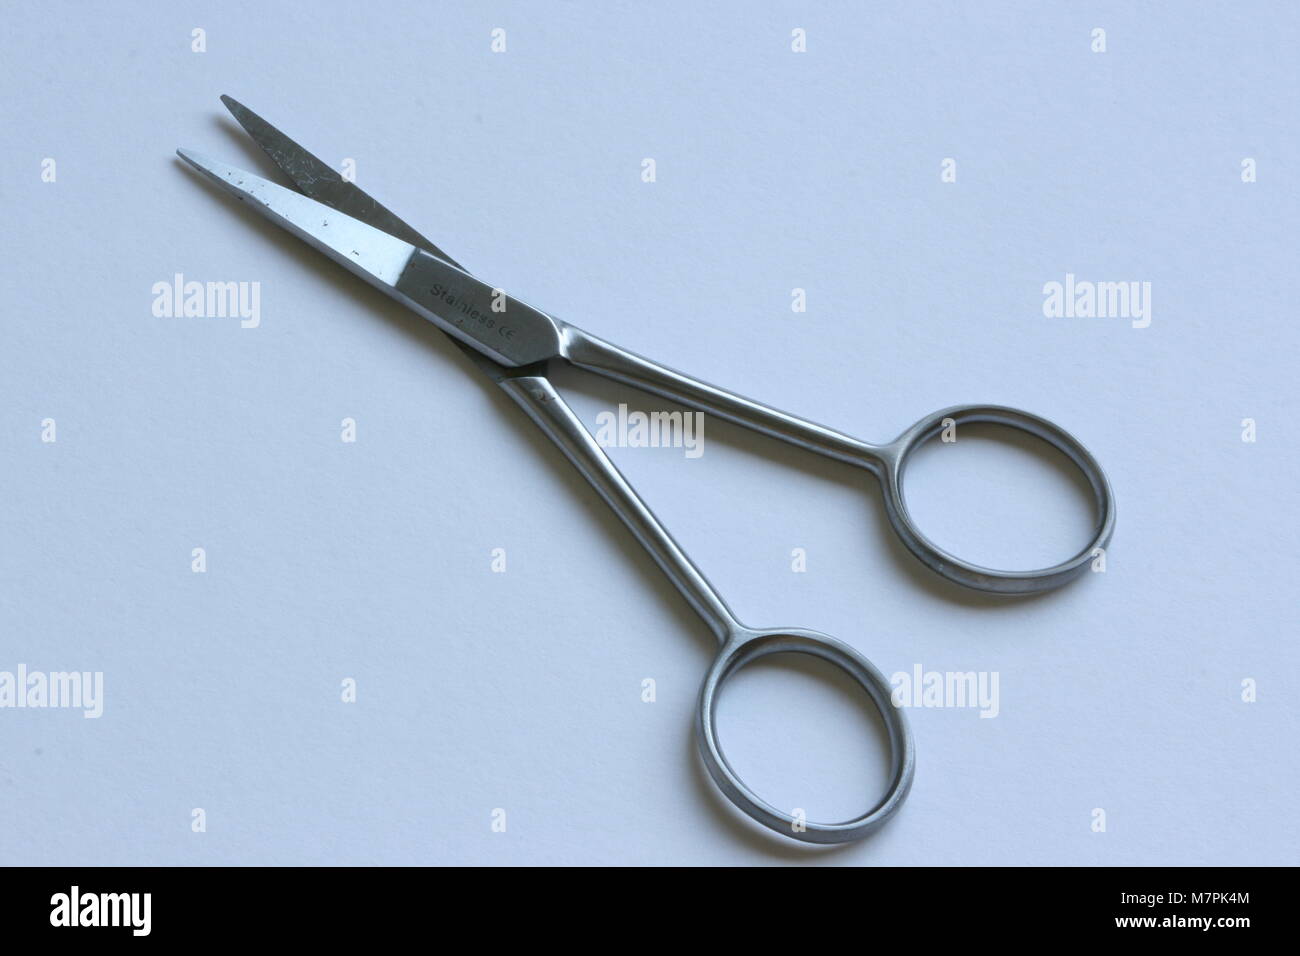 Dissecting Scissors High Resolution Stock Photography and Images - Alamy